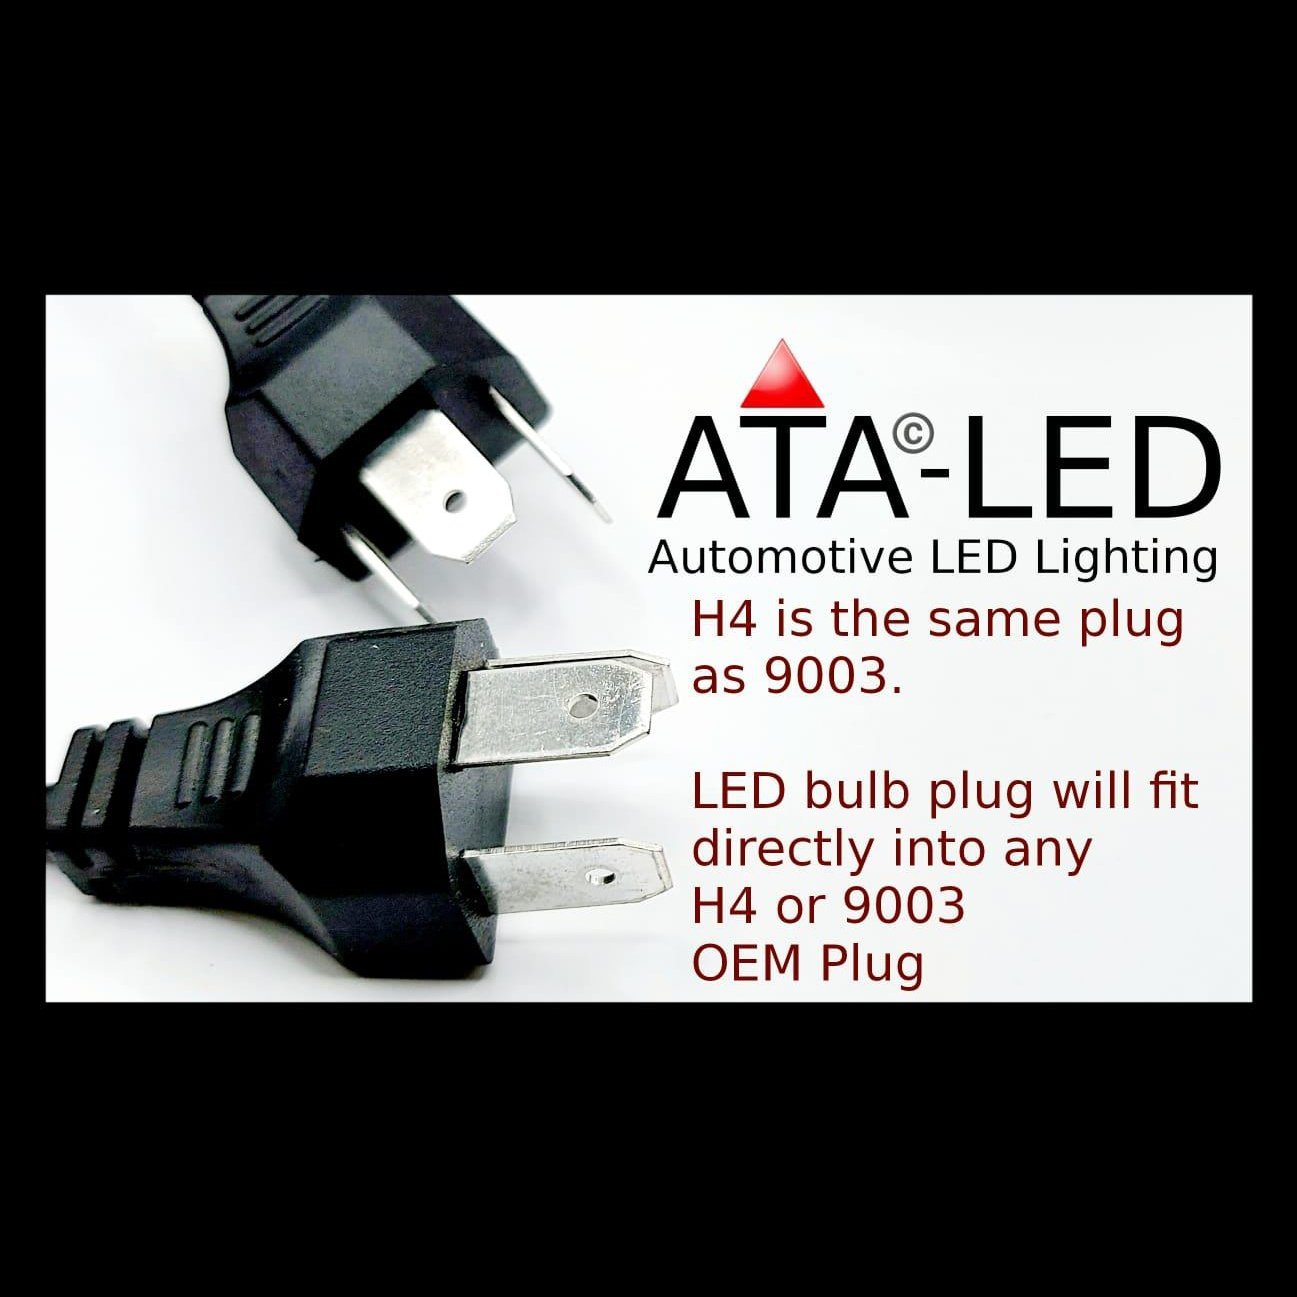 h4 is the same plug as 9003 LED bulb plug will fit directly int any H4 or 9003 OEM Plug